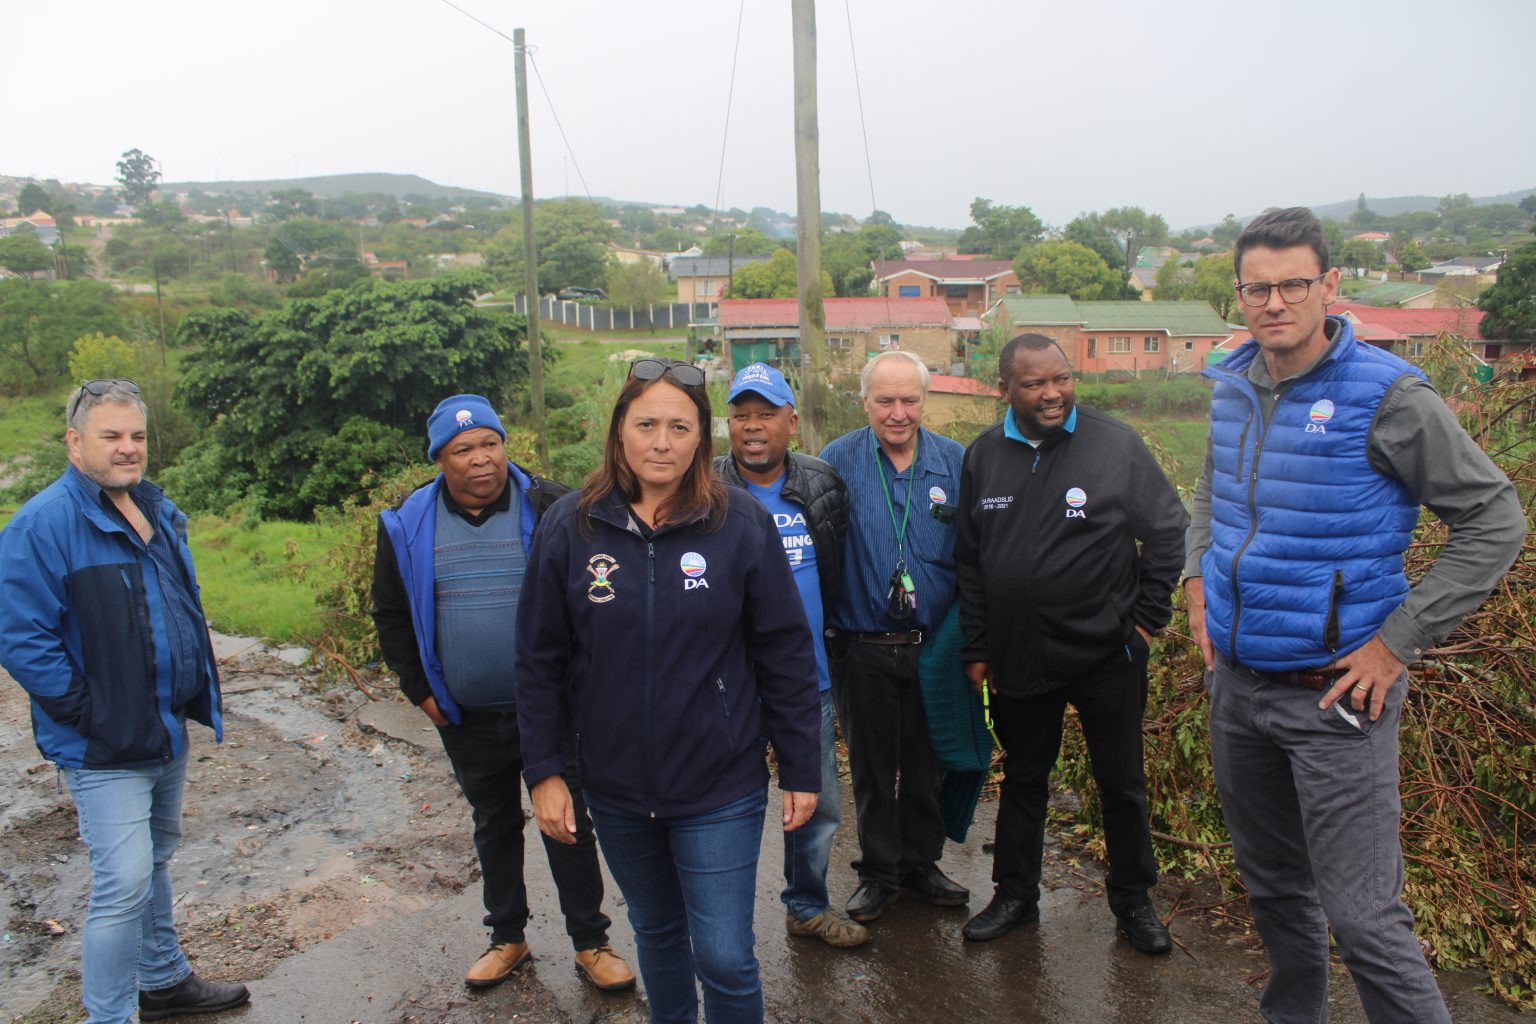 DA provincial leaders and local councillors, from left to right: Kevin Mileham, Xolani Madyo, Vicky Knoetze, Luvuyo Sizani, Geoff Embling, Robyn Jantjies and Andrew Whitfield went on a site-inspection in Makhanda this week. Photo: Selenathi Botha.